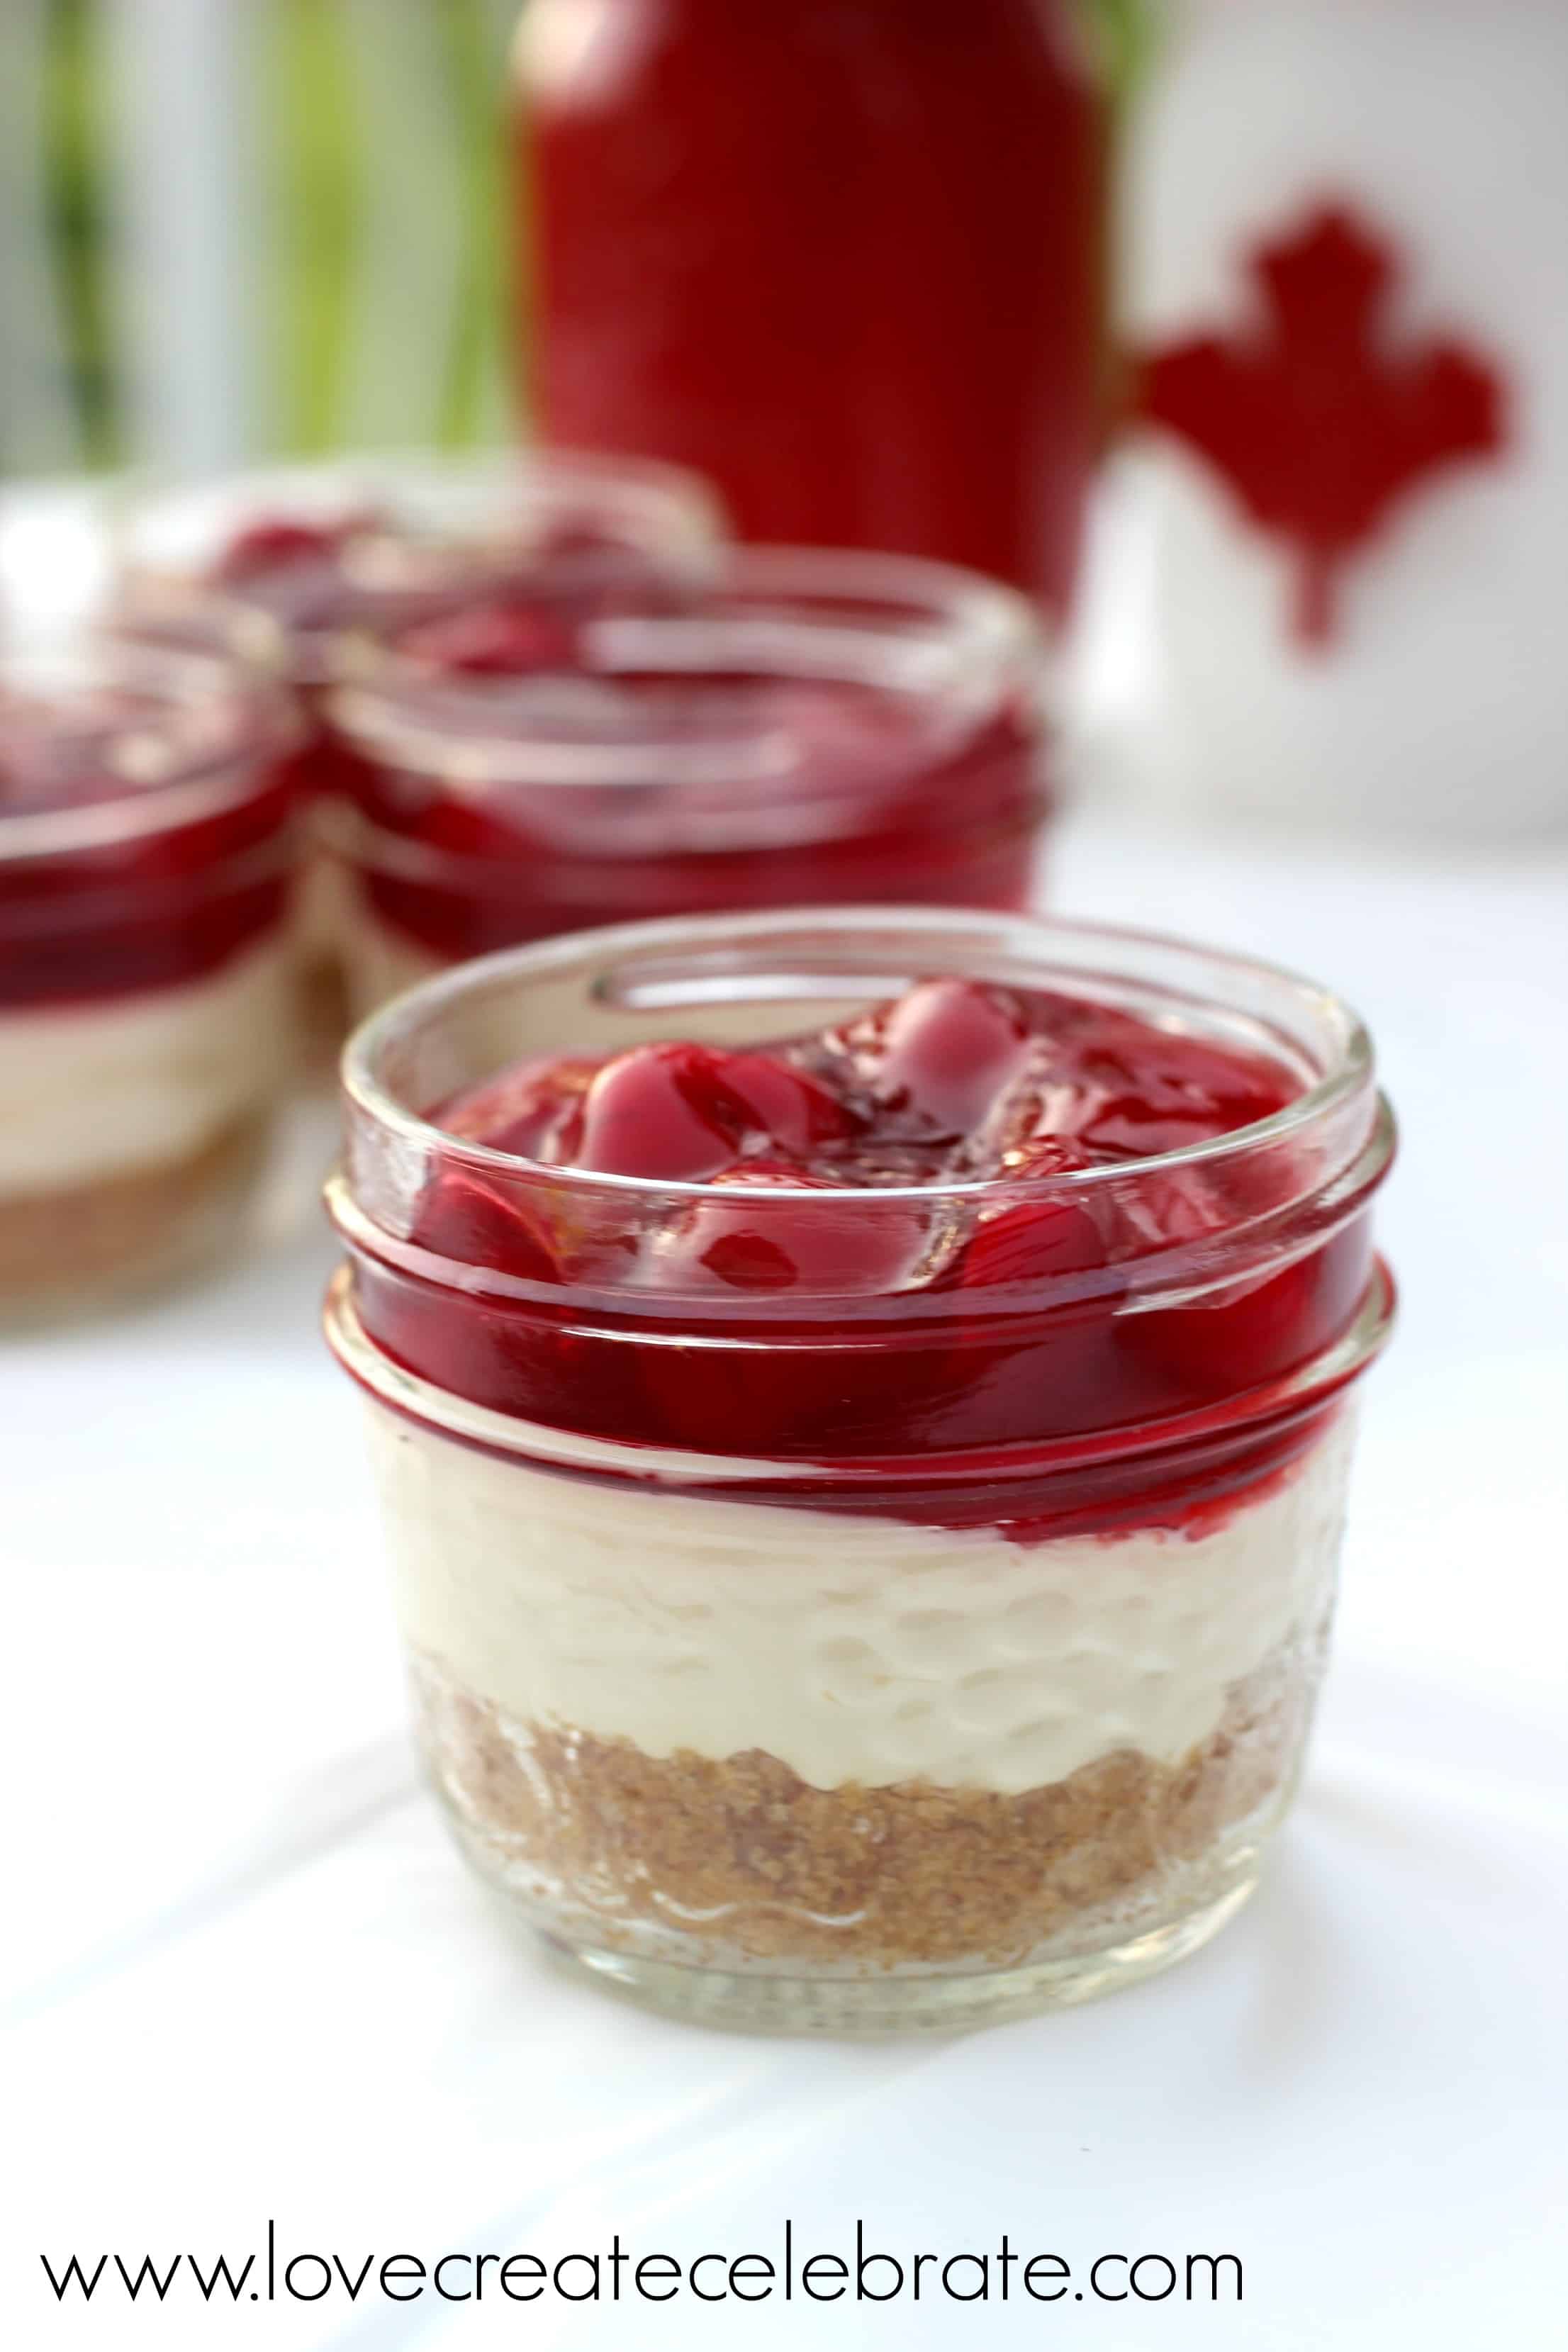 These mini cherry cheesecakes are so easy to make, delicious, and a perfect Valentine's day, hostess, or girl's night gift.